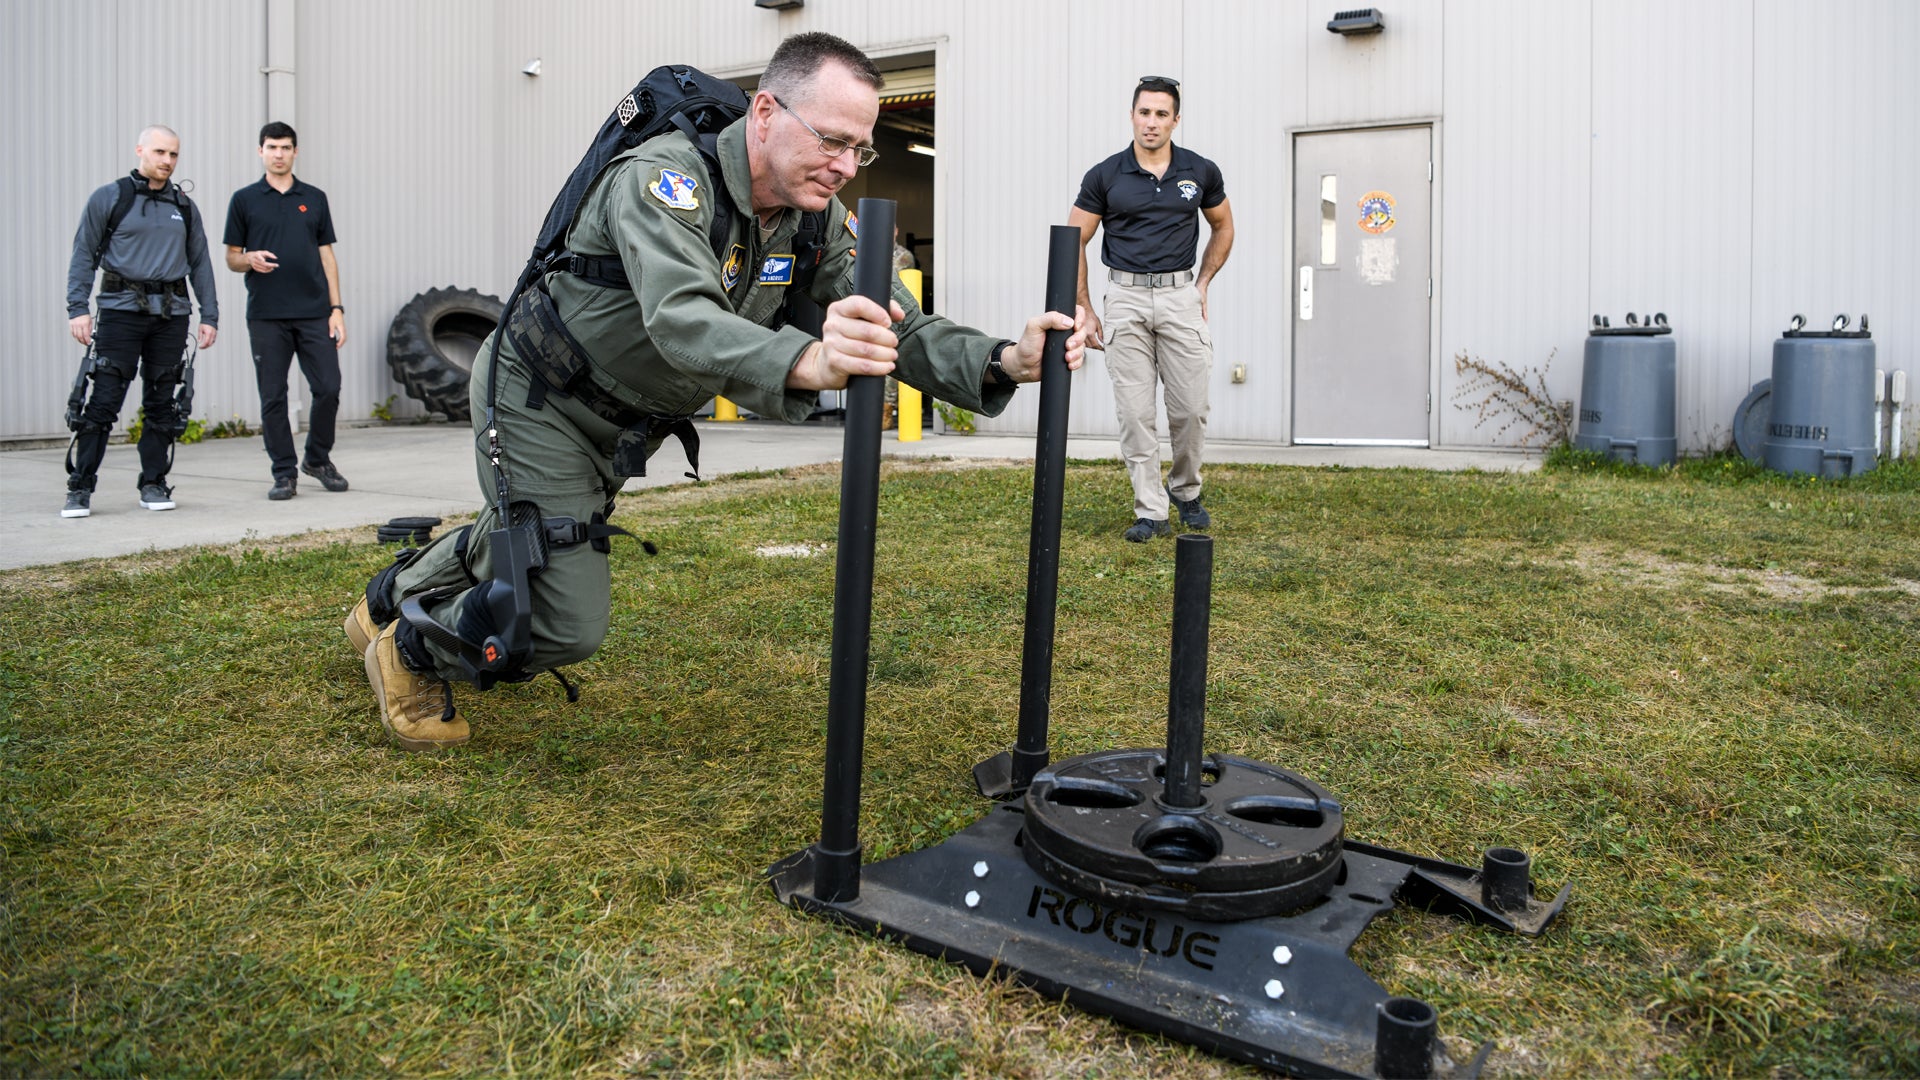 The Air Force is testing a new exoskeleton to lighten the load for airmen